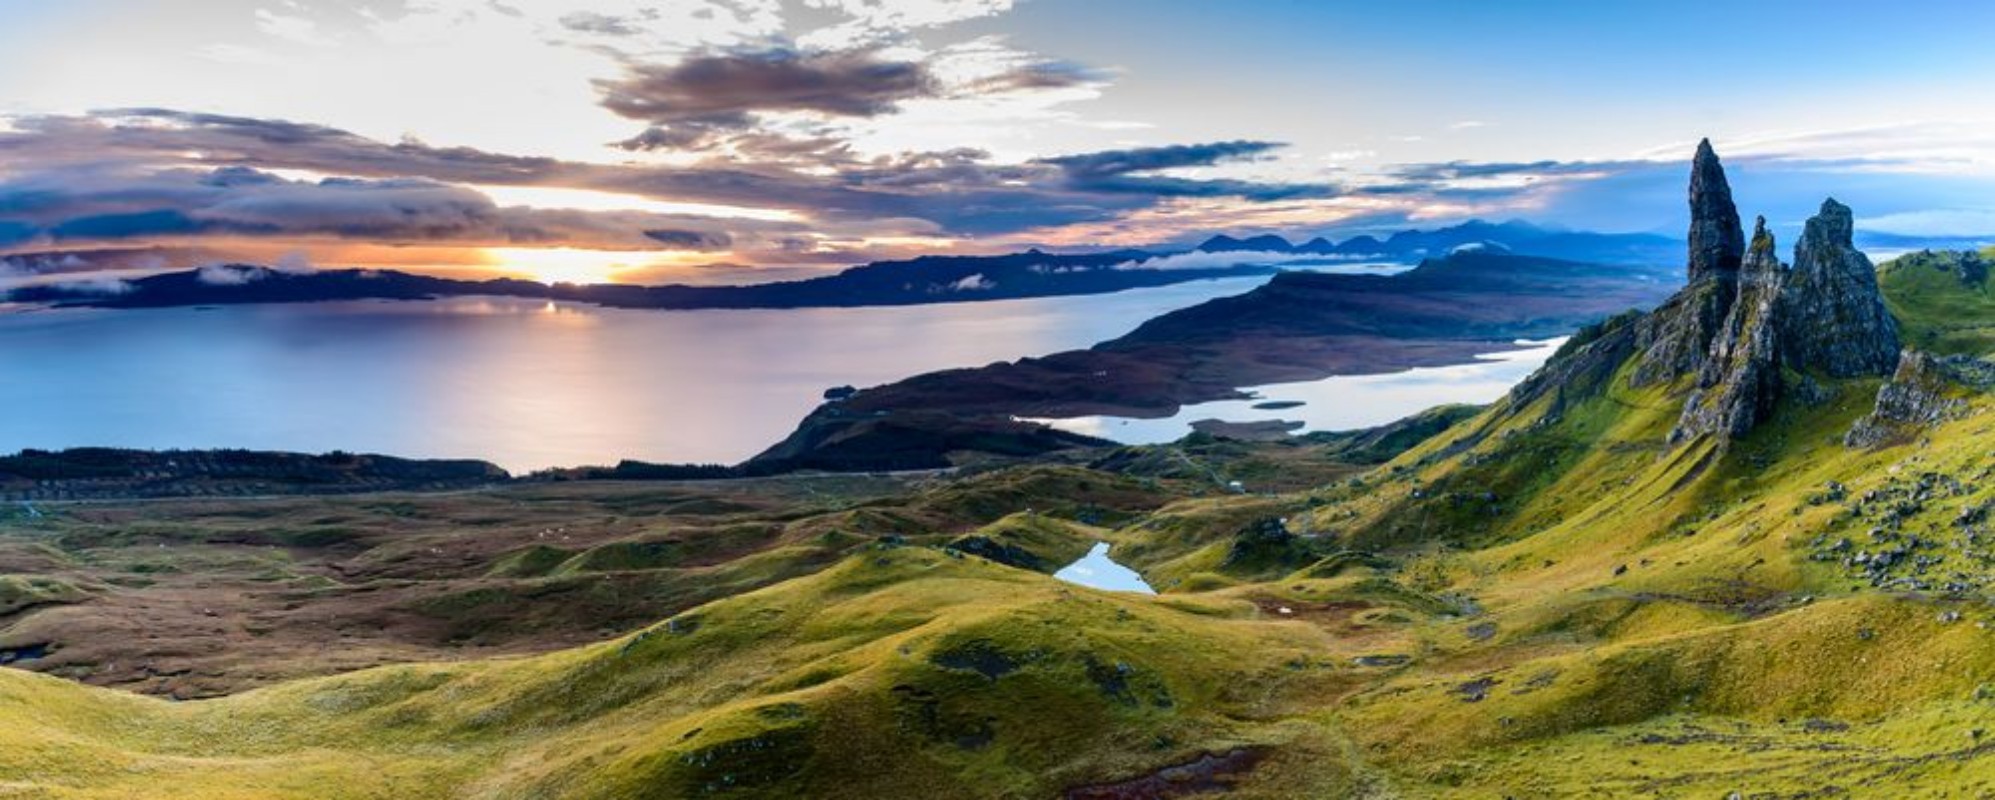 Image de Sunrise at the most popular location on the Isle of Skye - The Old Man of Storr - beautiful panorama of an amazing scenery with vivid colors and picturesque panorama - symbolic tourist attraction